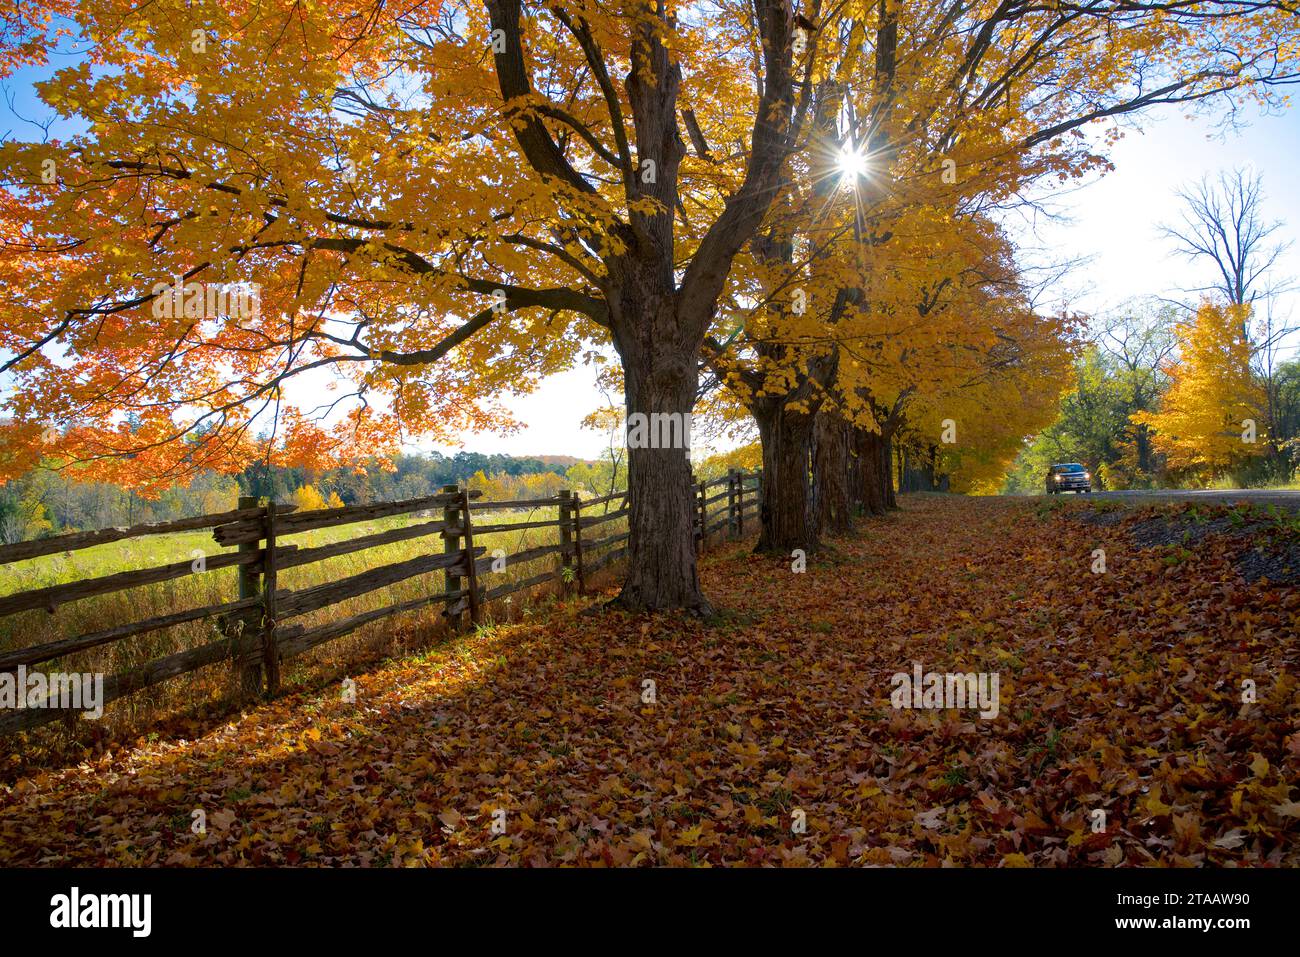 Lens flare on a beautiful country road with autumn leaf colour Stock Photo